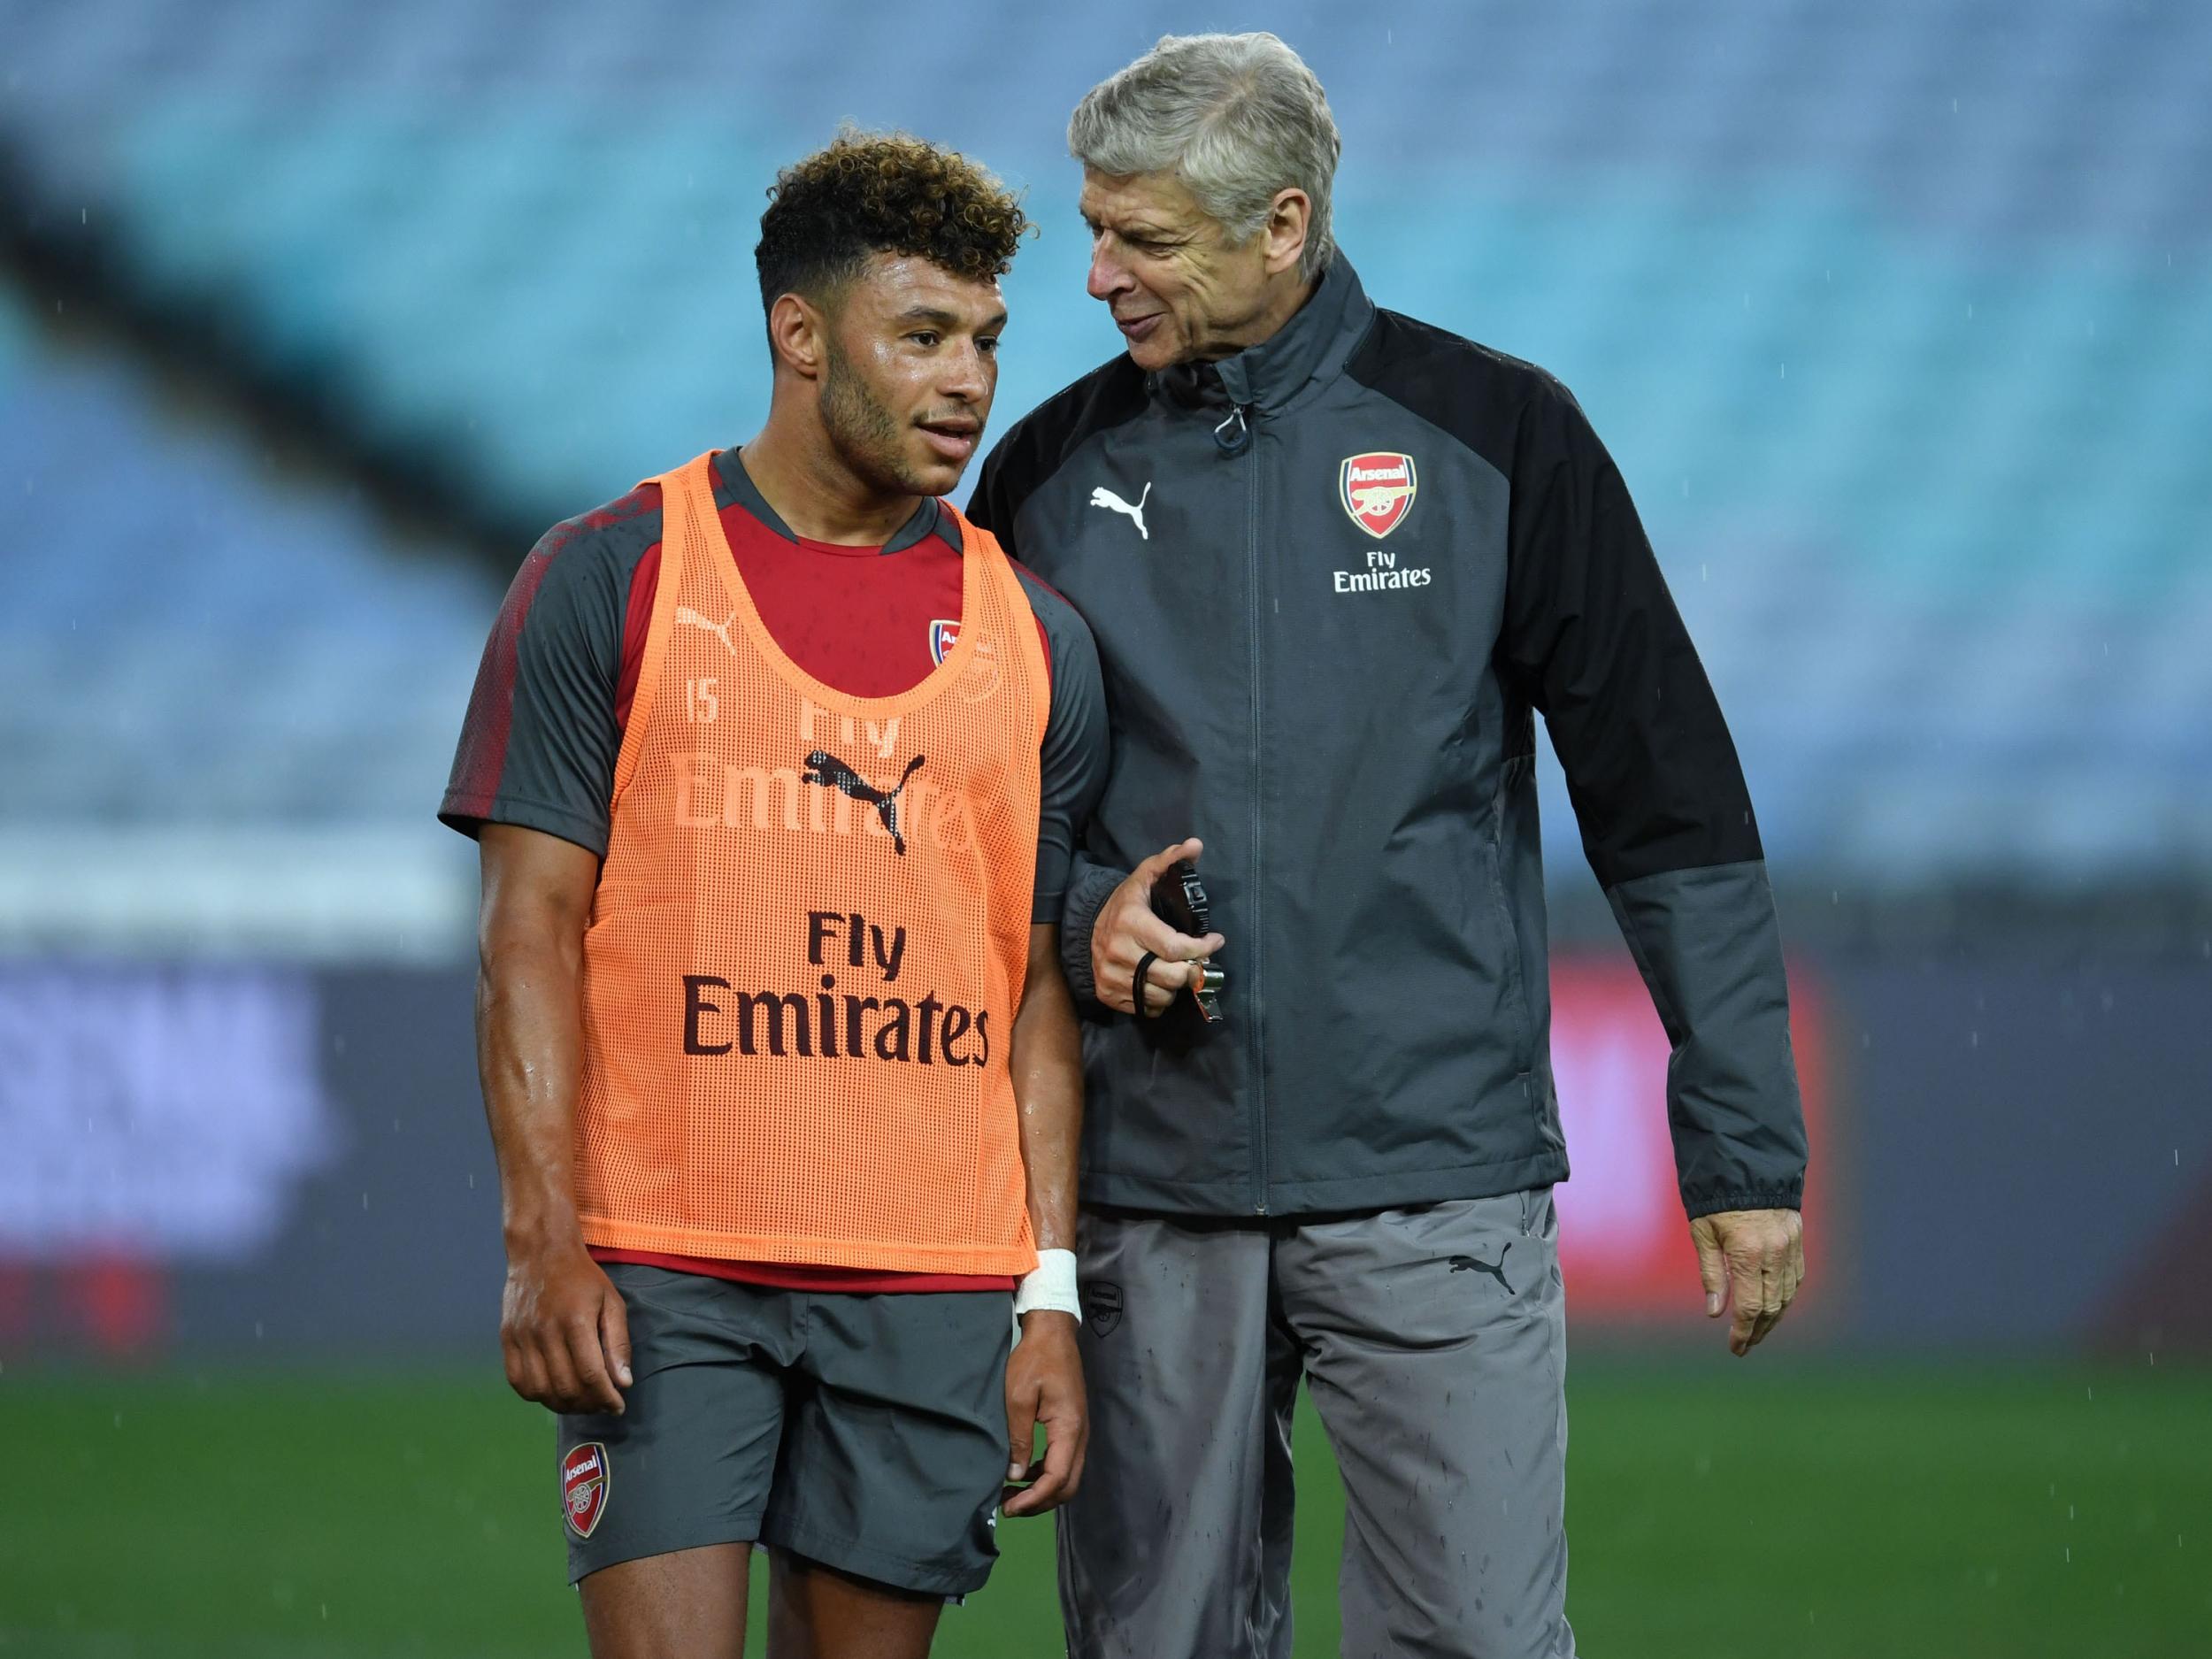 Oxlade-Chamberlain left arsenal just days after the 4-0 defeat to Liverpool